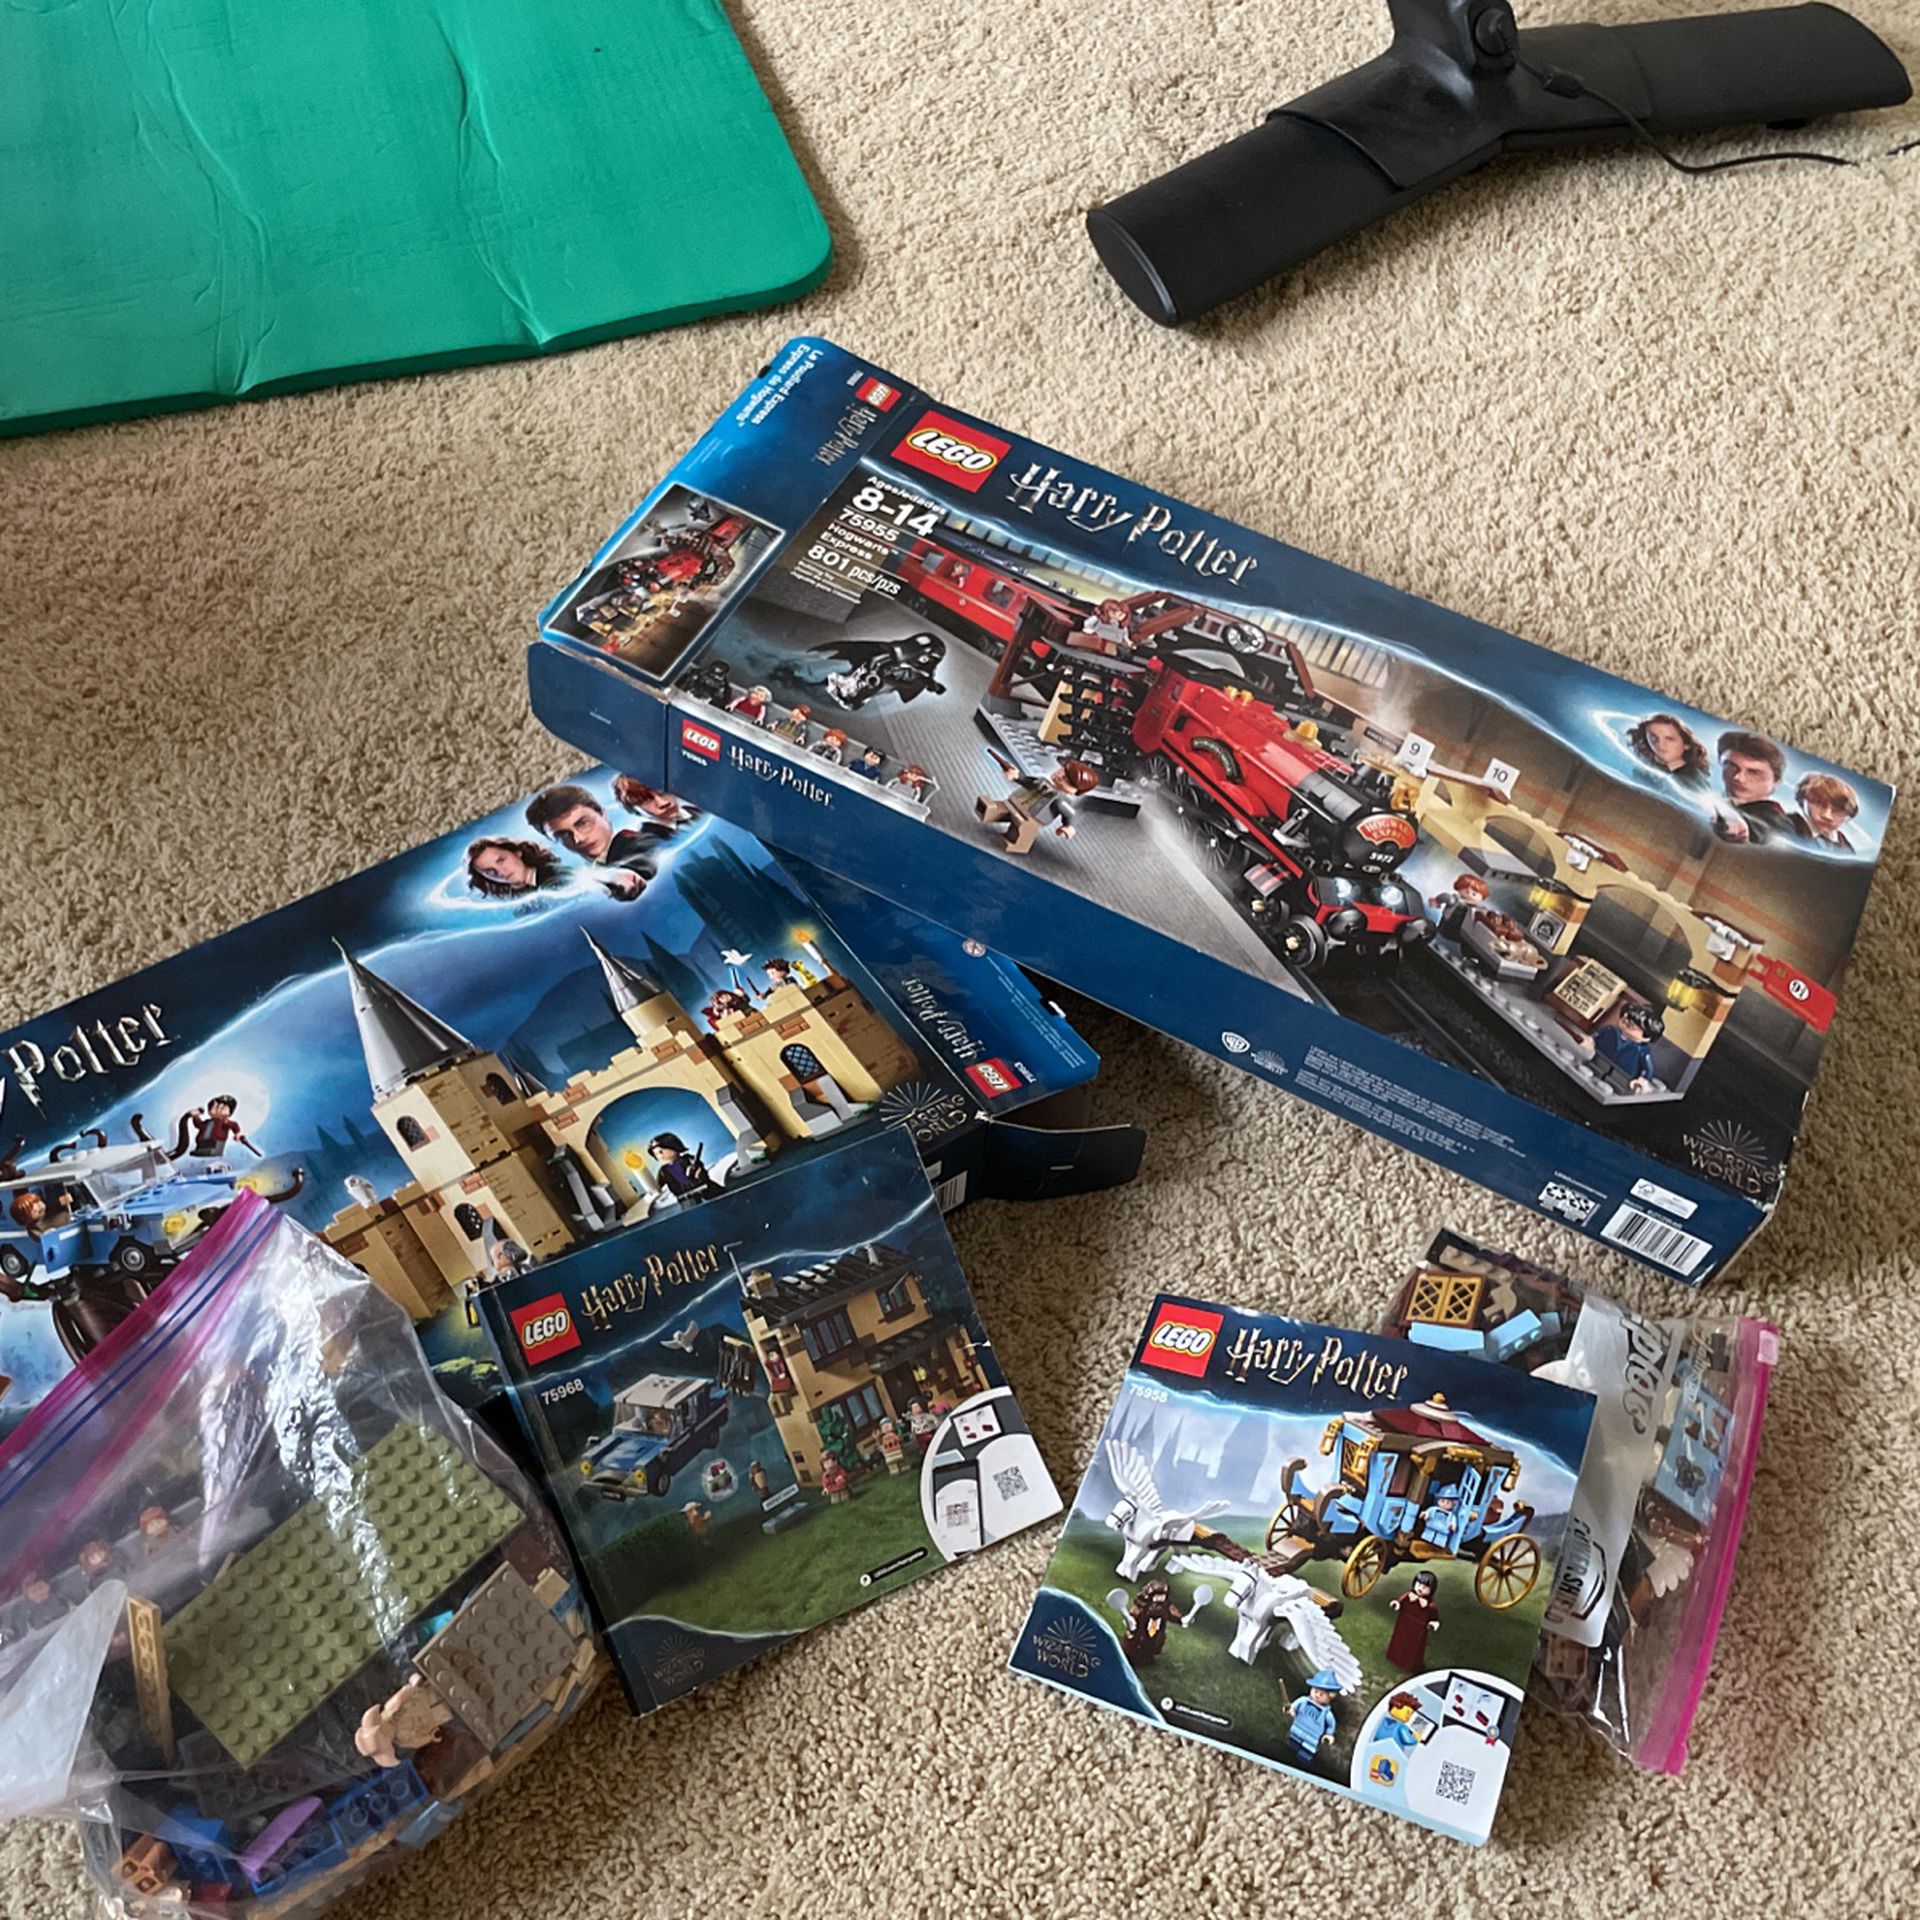 Lego Harry Potter 4 Sets (75953, 75968, 75958) for in Everett, WA - OfferUp